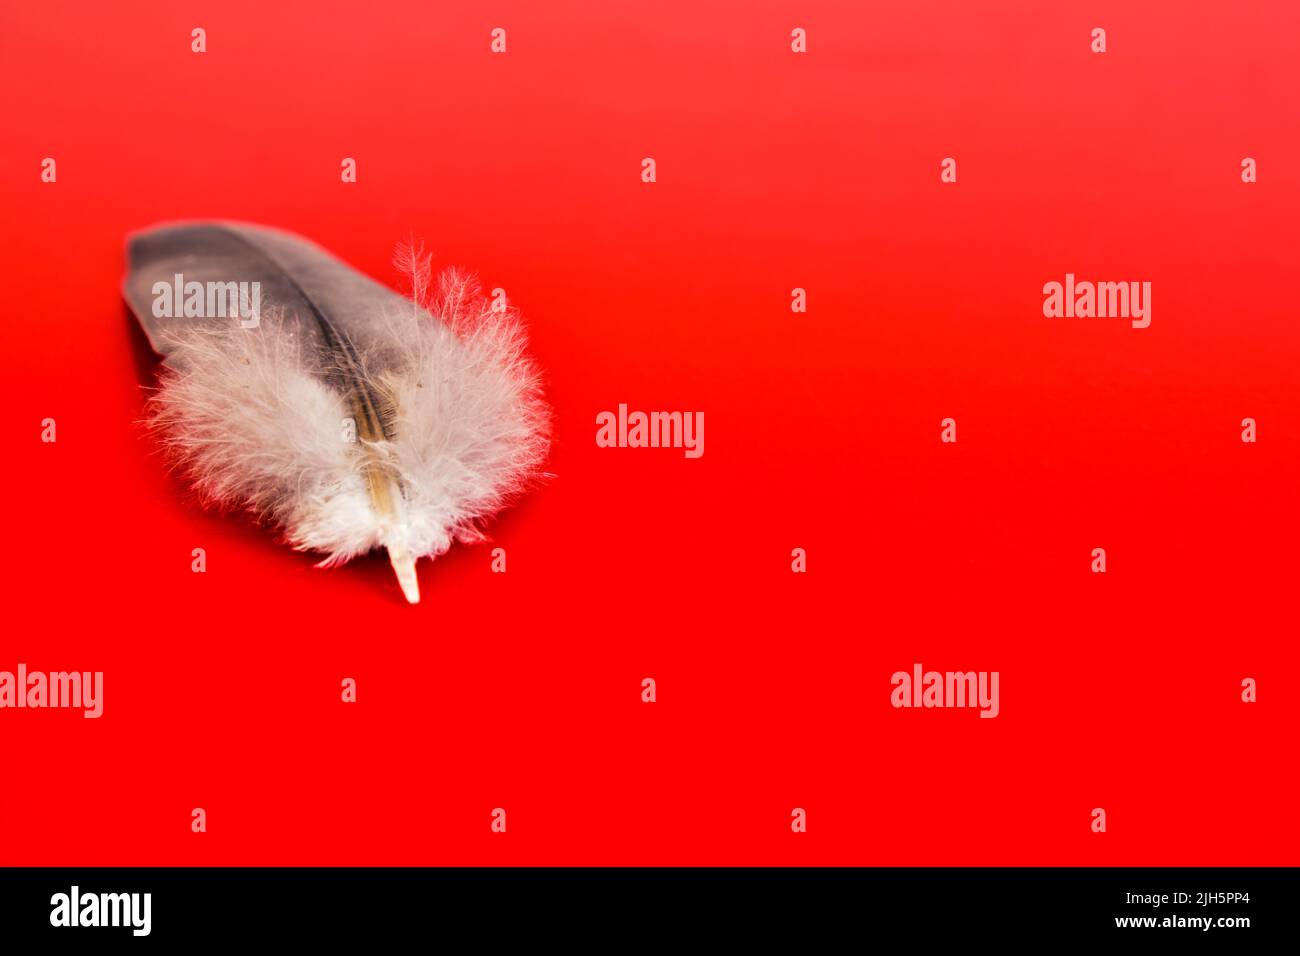 Single fluffy feather on red background. Stock Photo